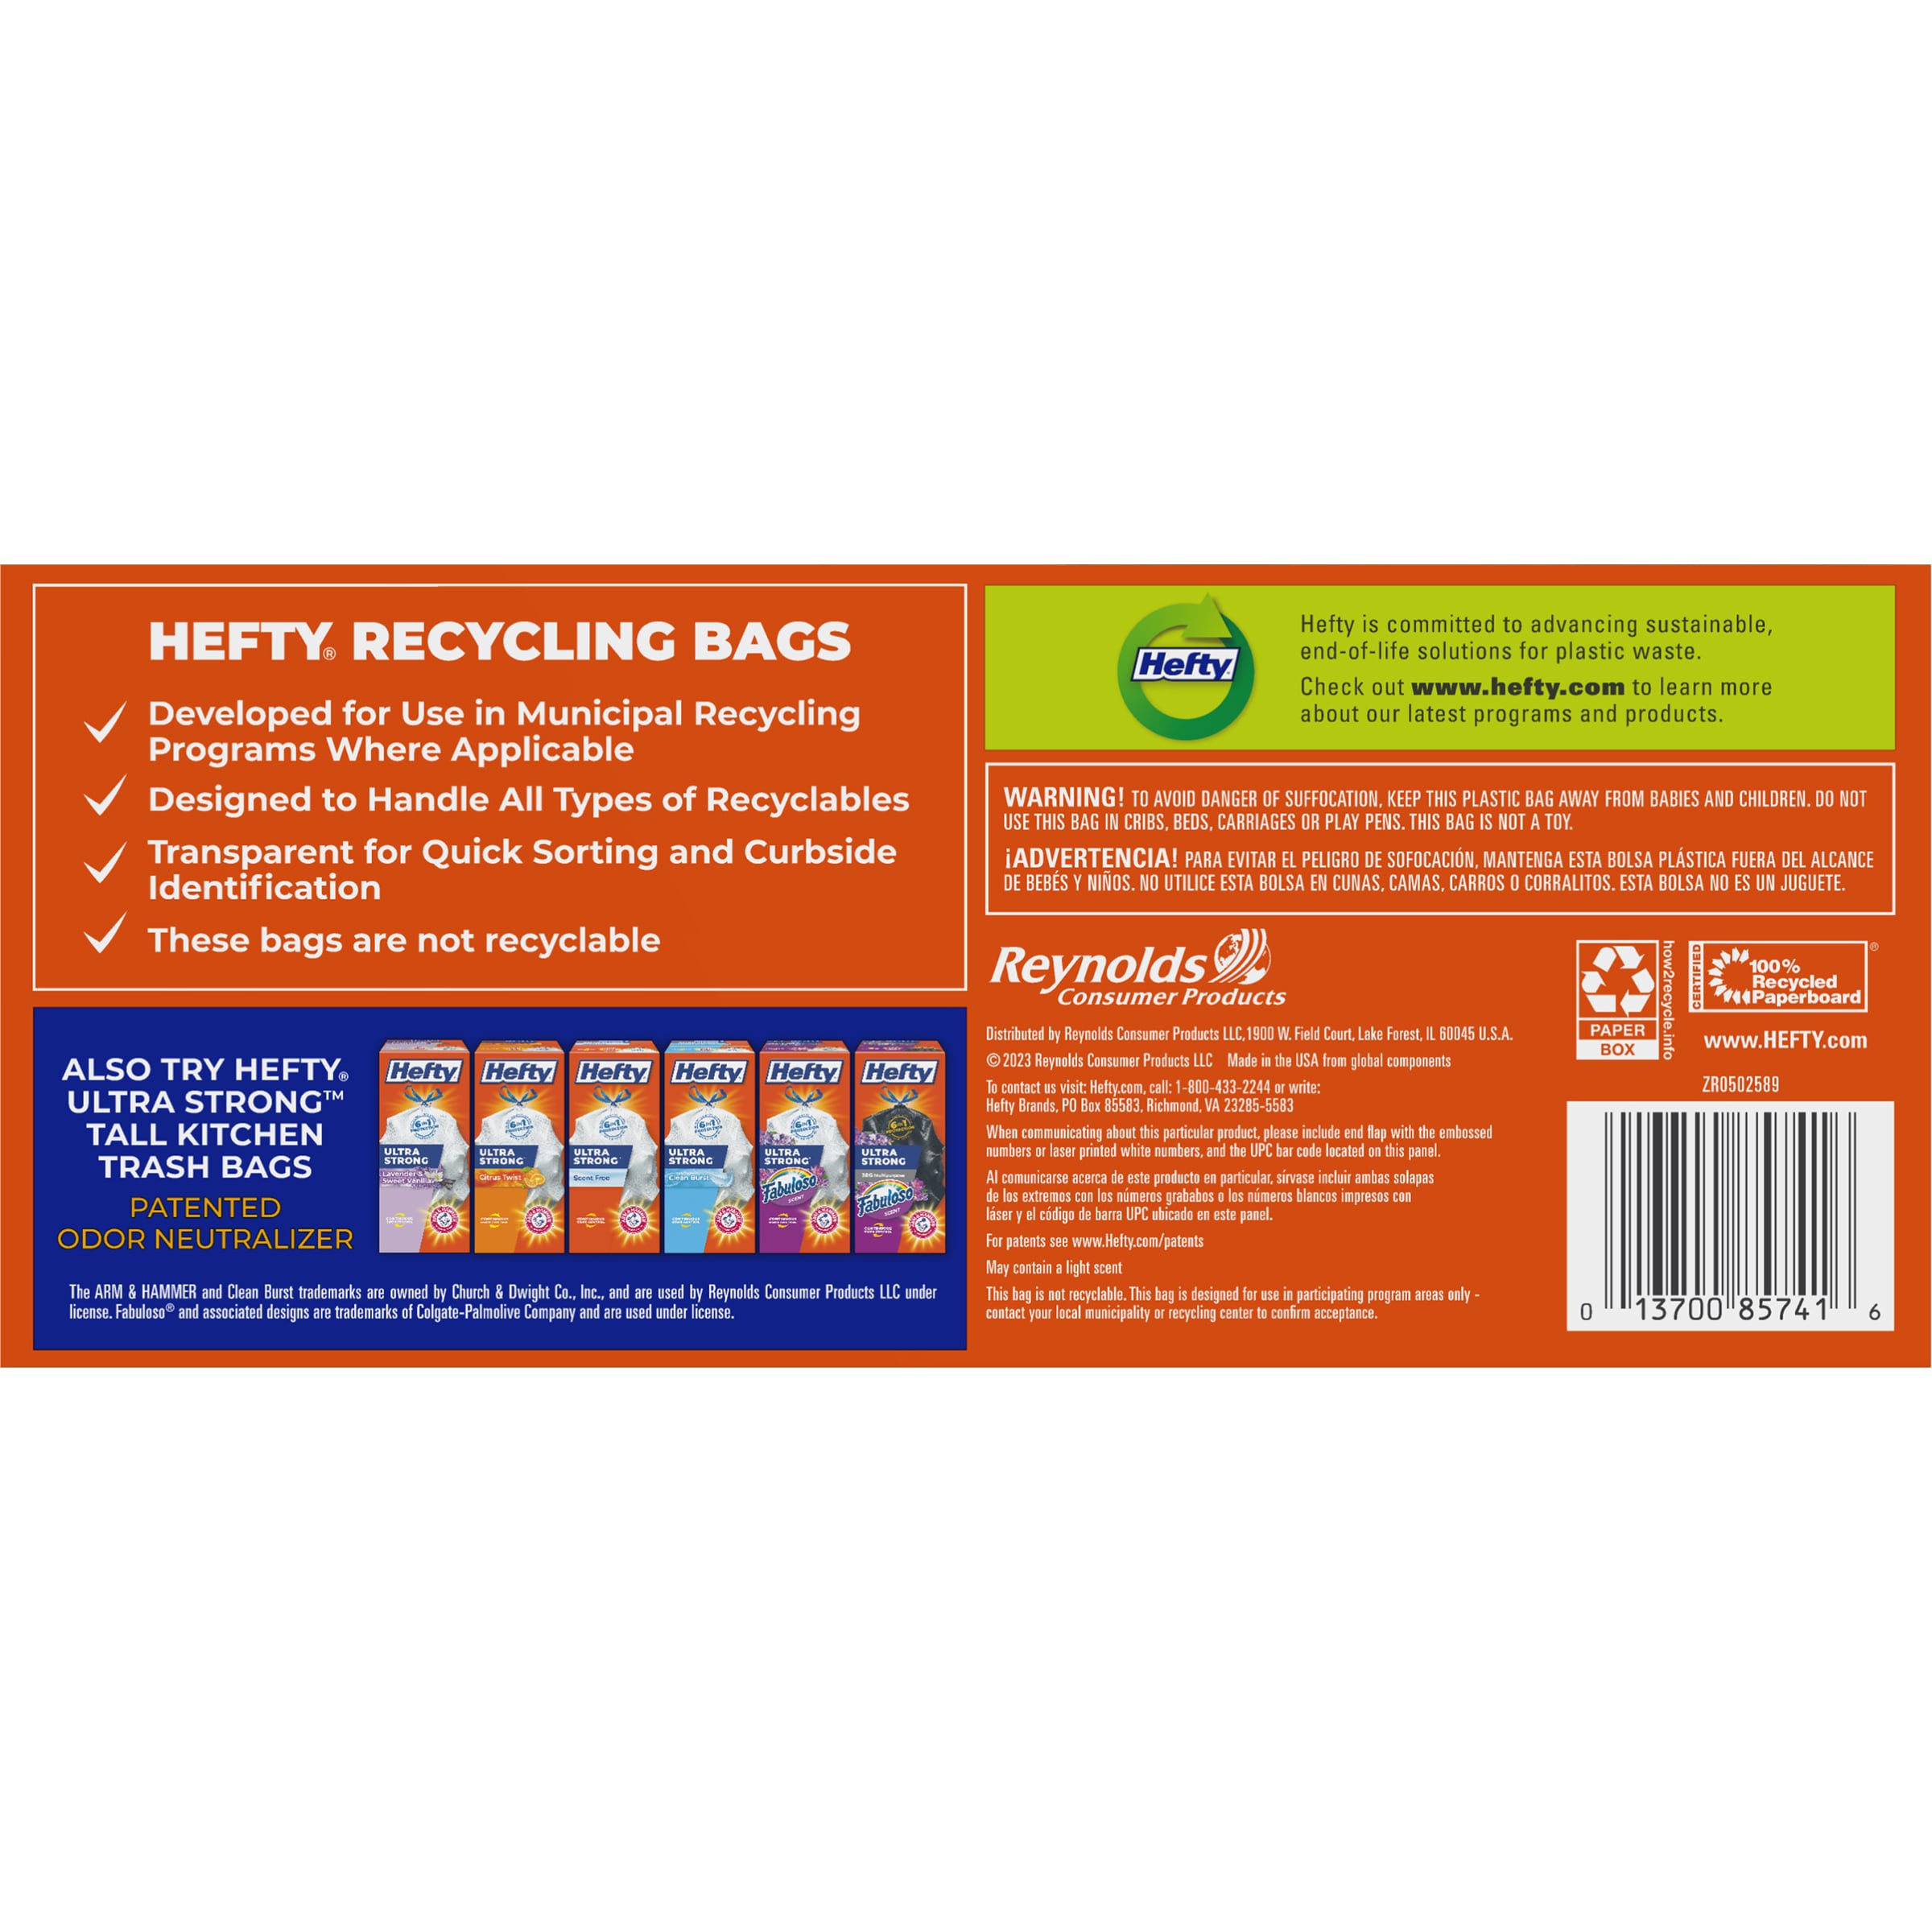 Glad Recycling Large Drawstring Blue Trash Bags - 30 Gallon - 28 Count  (Packaging May Vary)